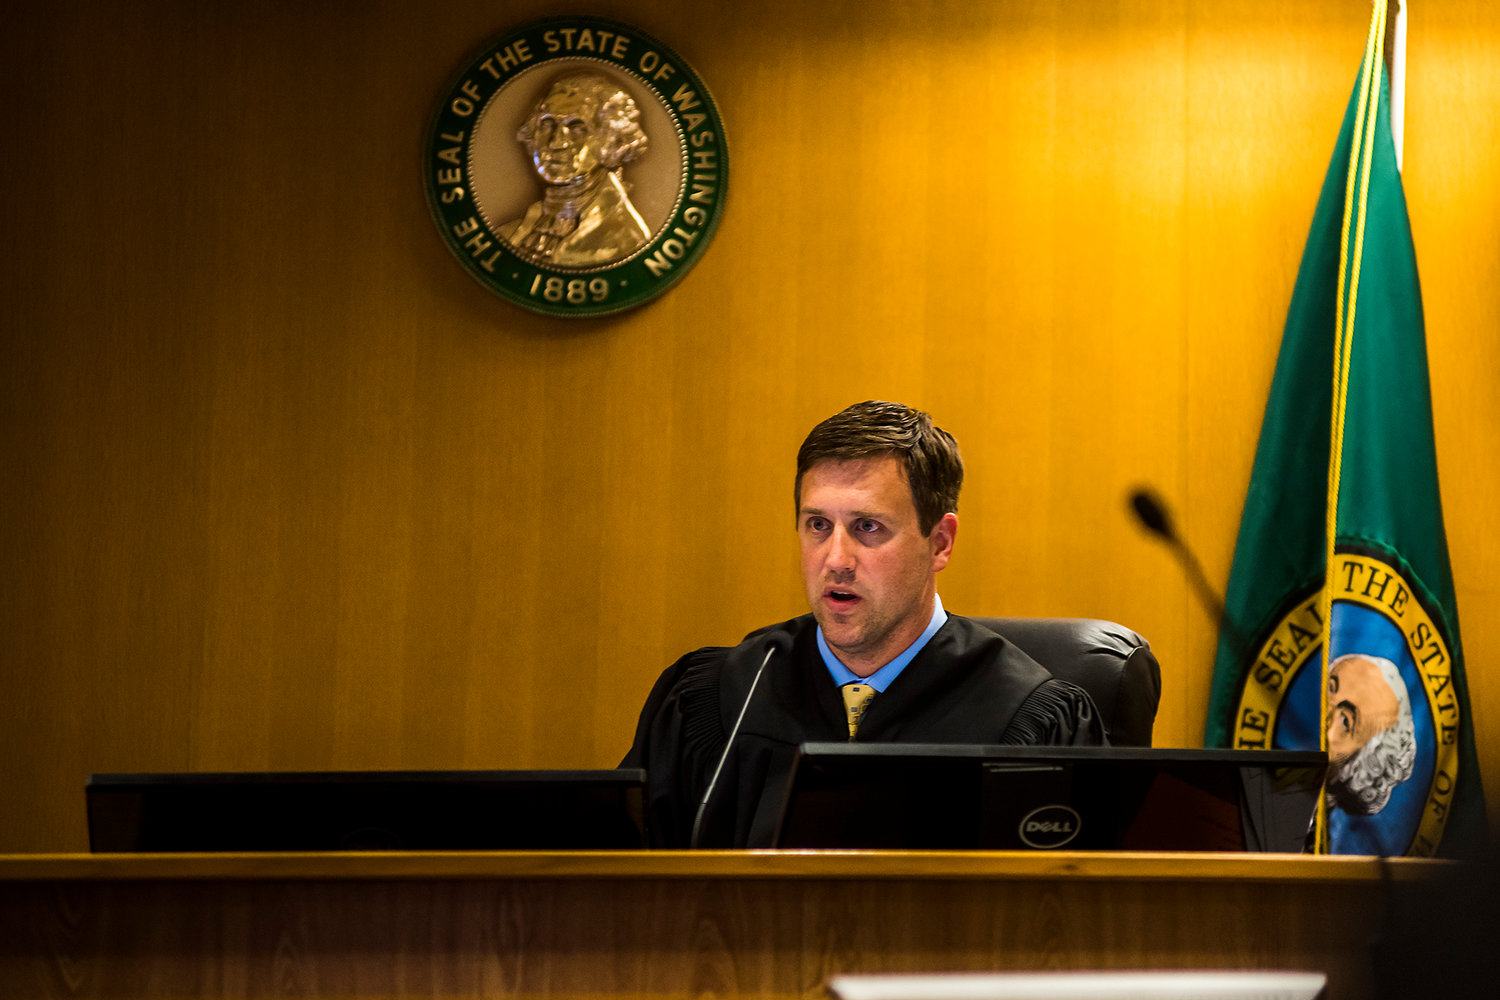 Court Commissioner Nathan Kortokrax speaks during a preliminary hearing for Eric Lee Roberts in Thurston County Superior Court Thursday afternoon in Olympia.